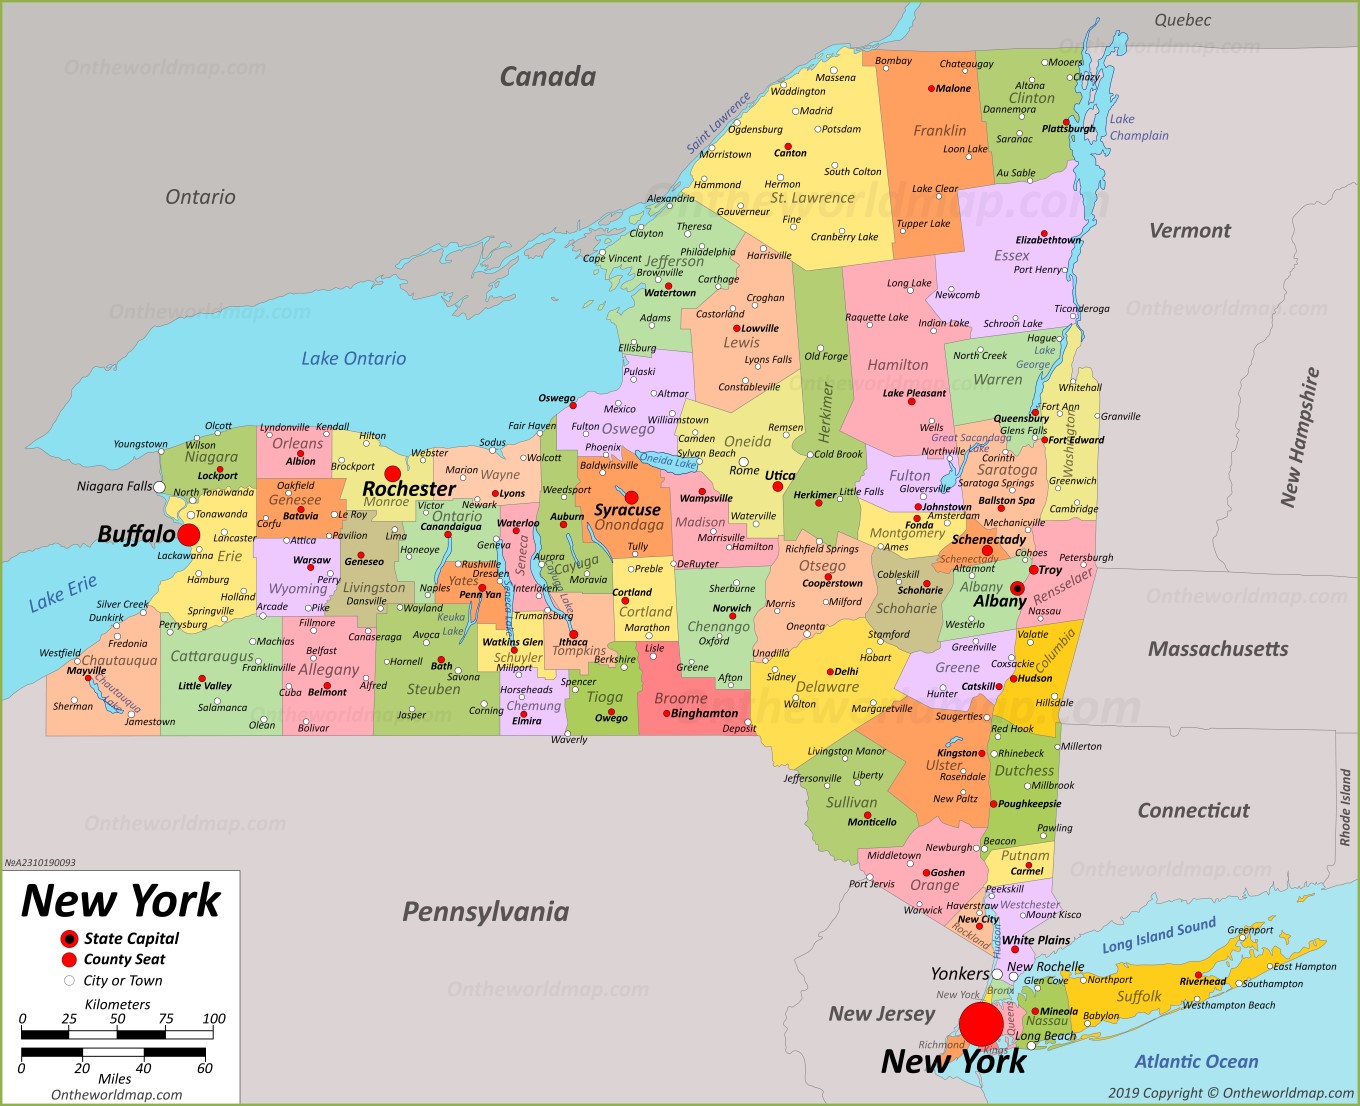 new york state on us map New York State Maps Usa Maps Of New York Ny new york state on us map